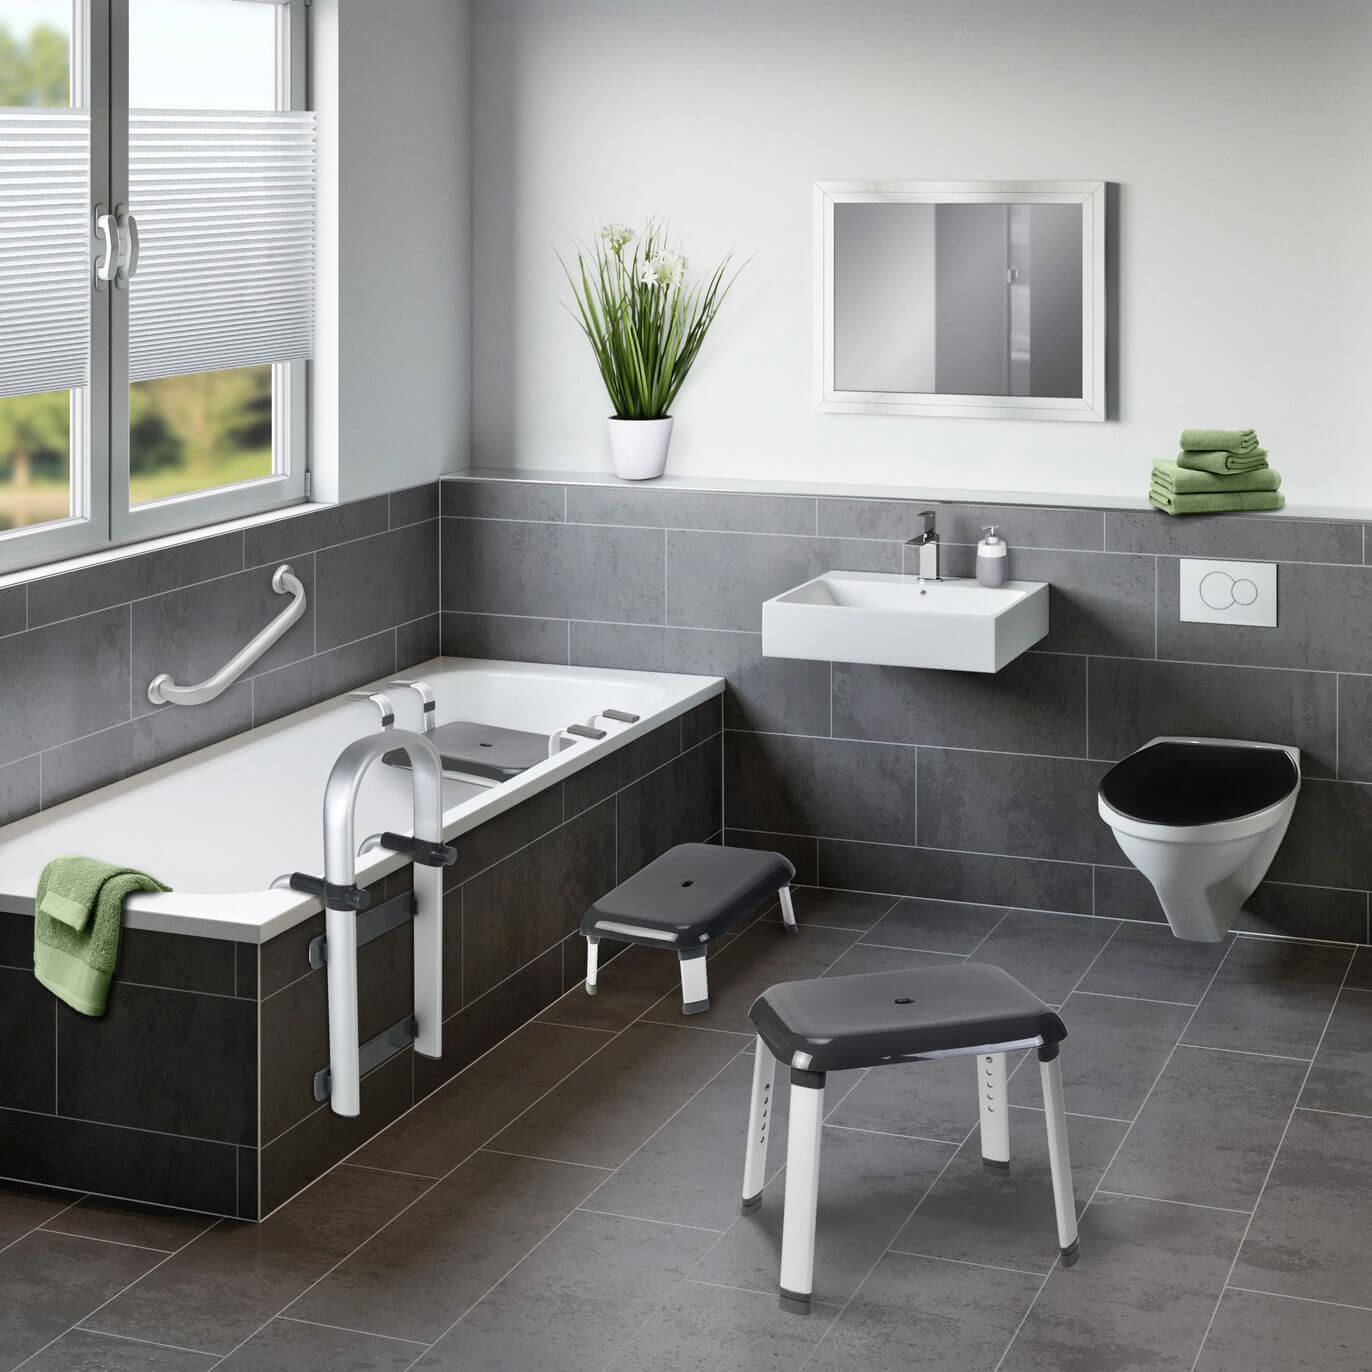 Aluminium and anthracite bathroom safety products